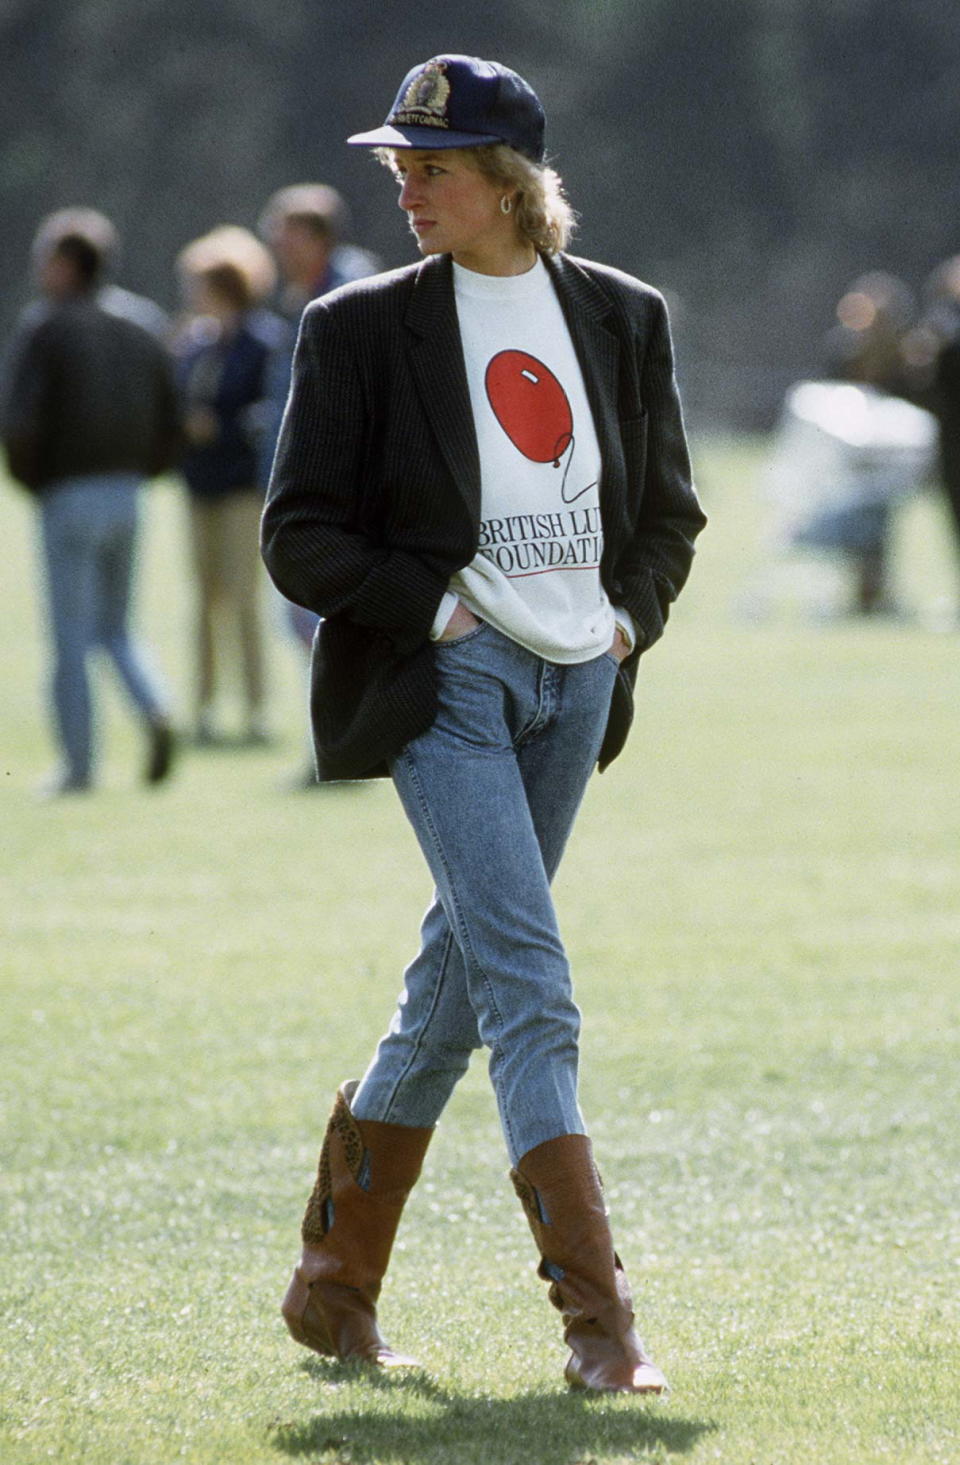 WINDSOR, UNITED KINGDOM - MAY 02:  Diana, Princess Of Wales At Guards Polo Club.  The Princess Is Casually Dressed In A Sweatshirt With The British Lung Foundation Logo On The Front, Jeans, Boots And A Baseball Cap.  (Photo by Tim Graham Photo Library via Getty Images)